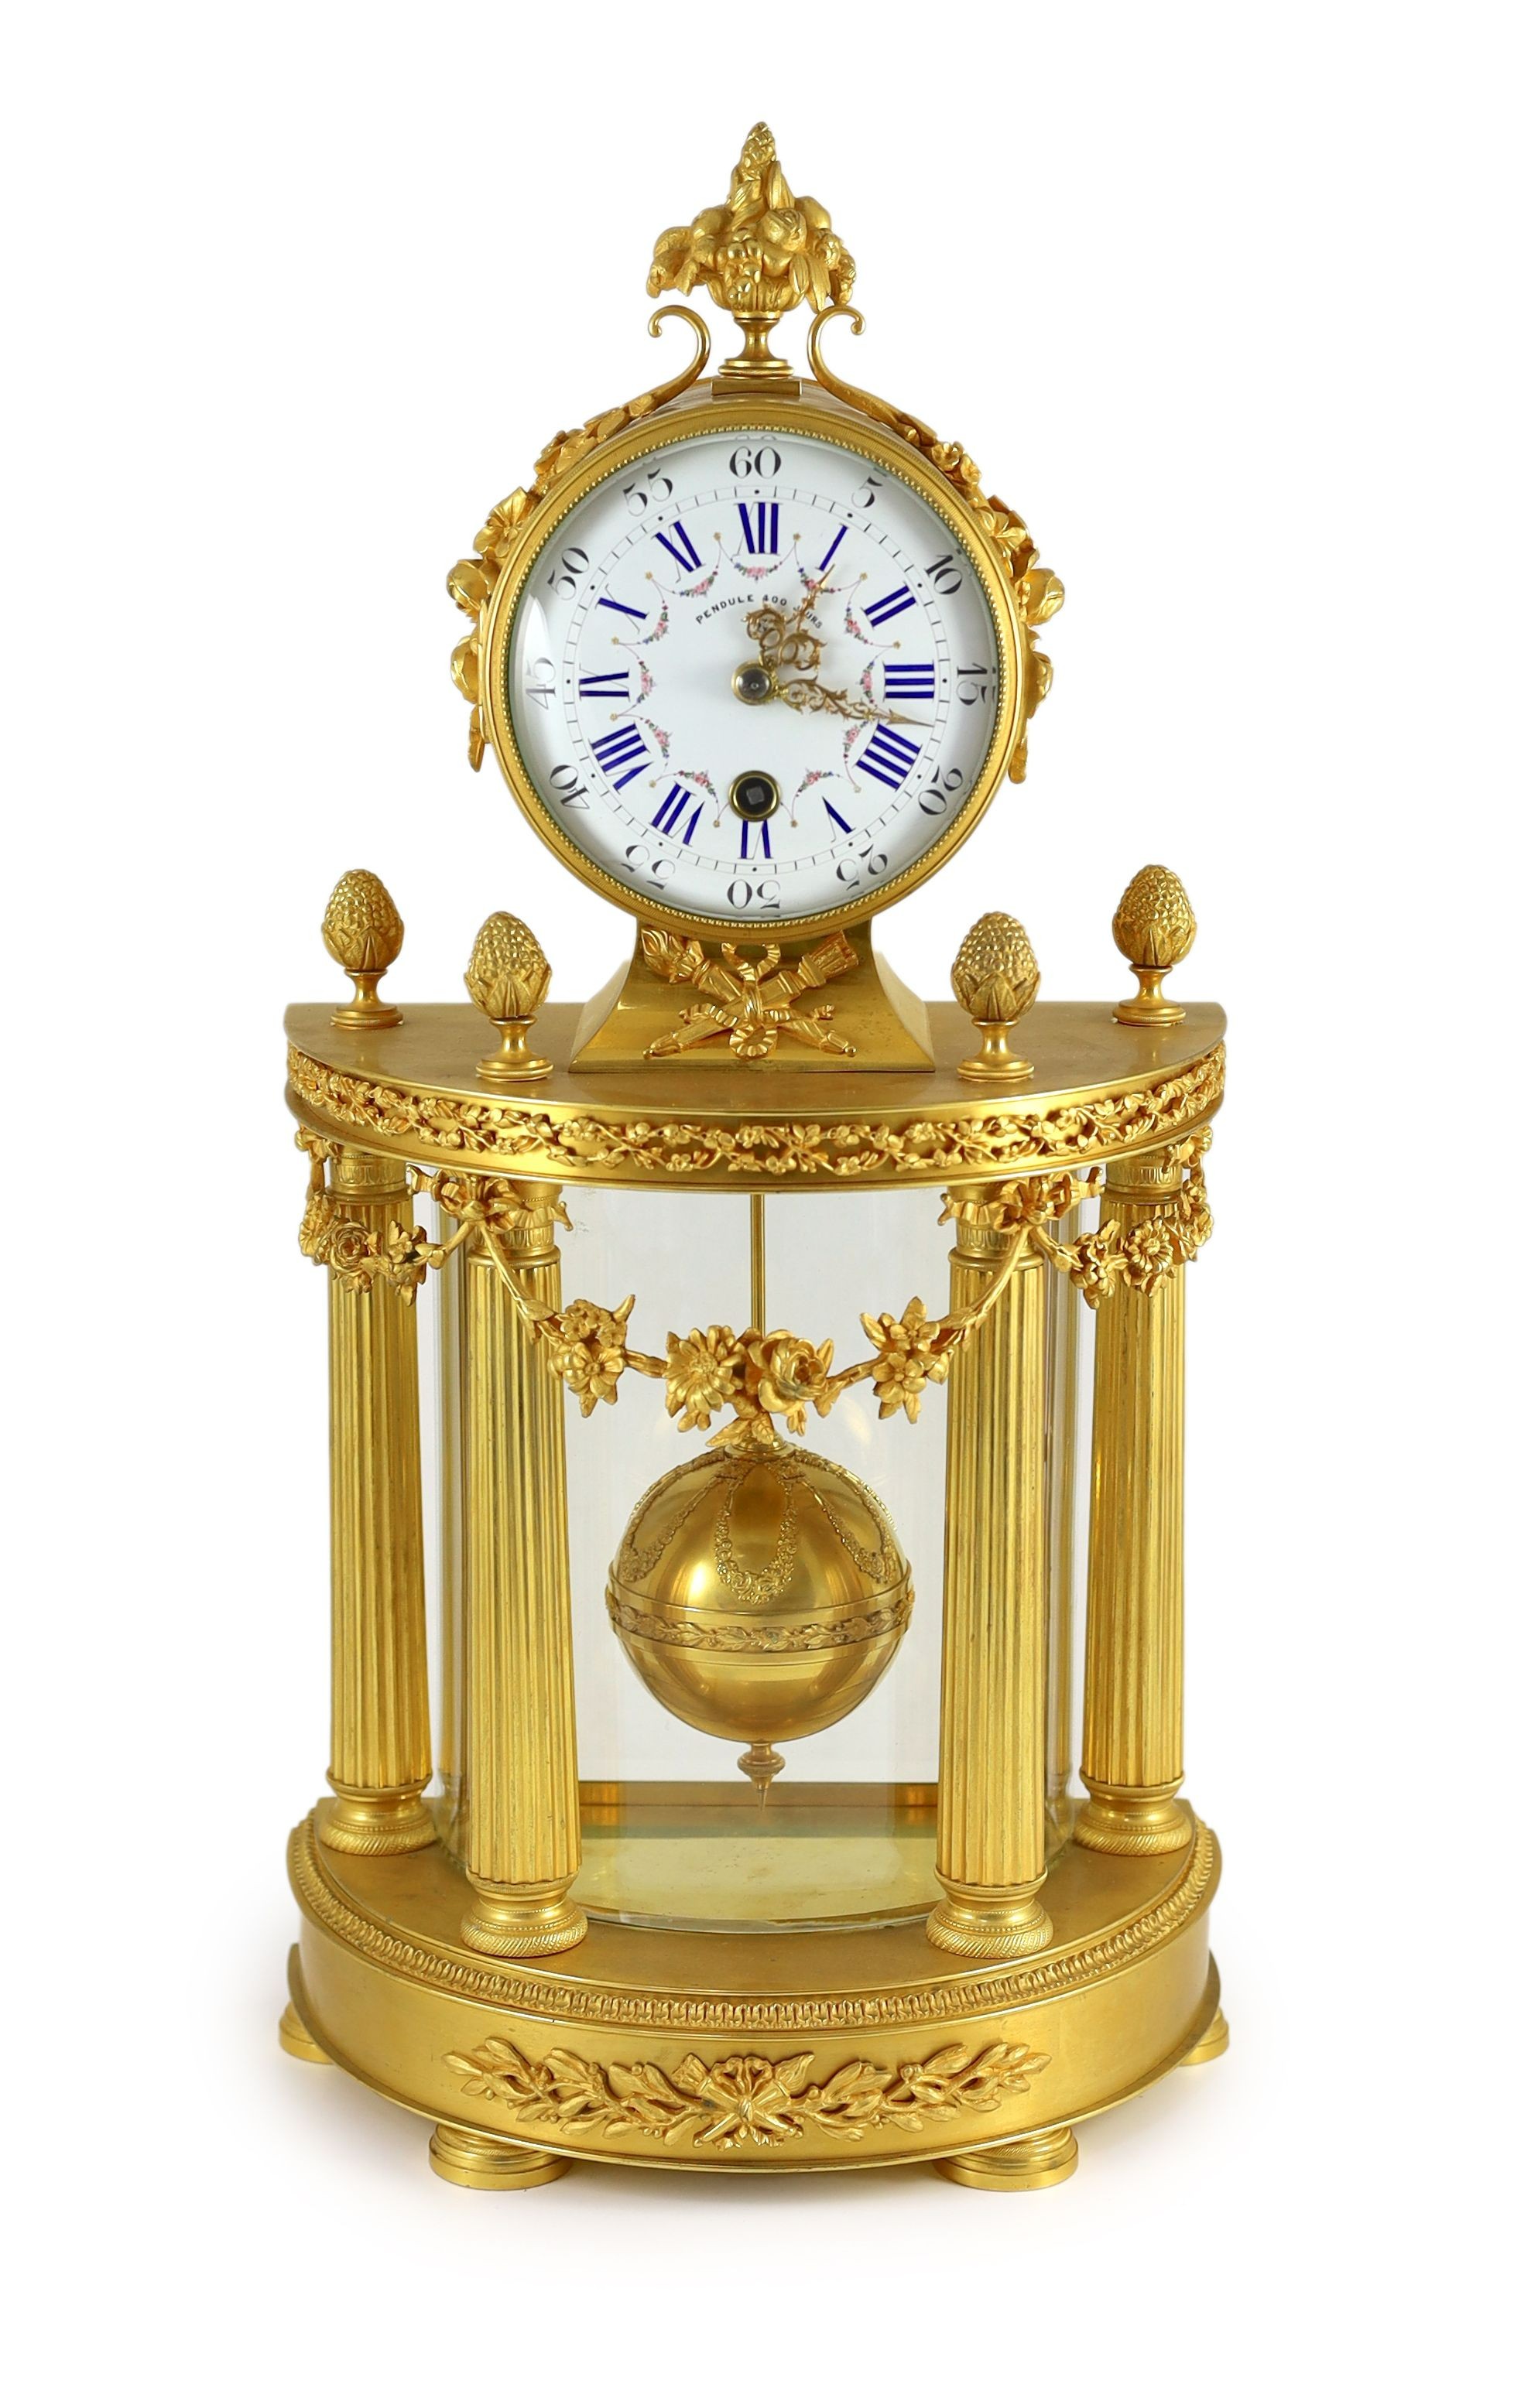 An early 20th century French ormolu 400 day mantel clock, in architectural case with floral